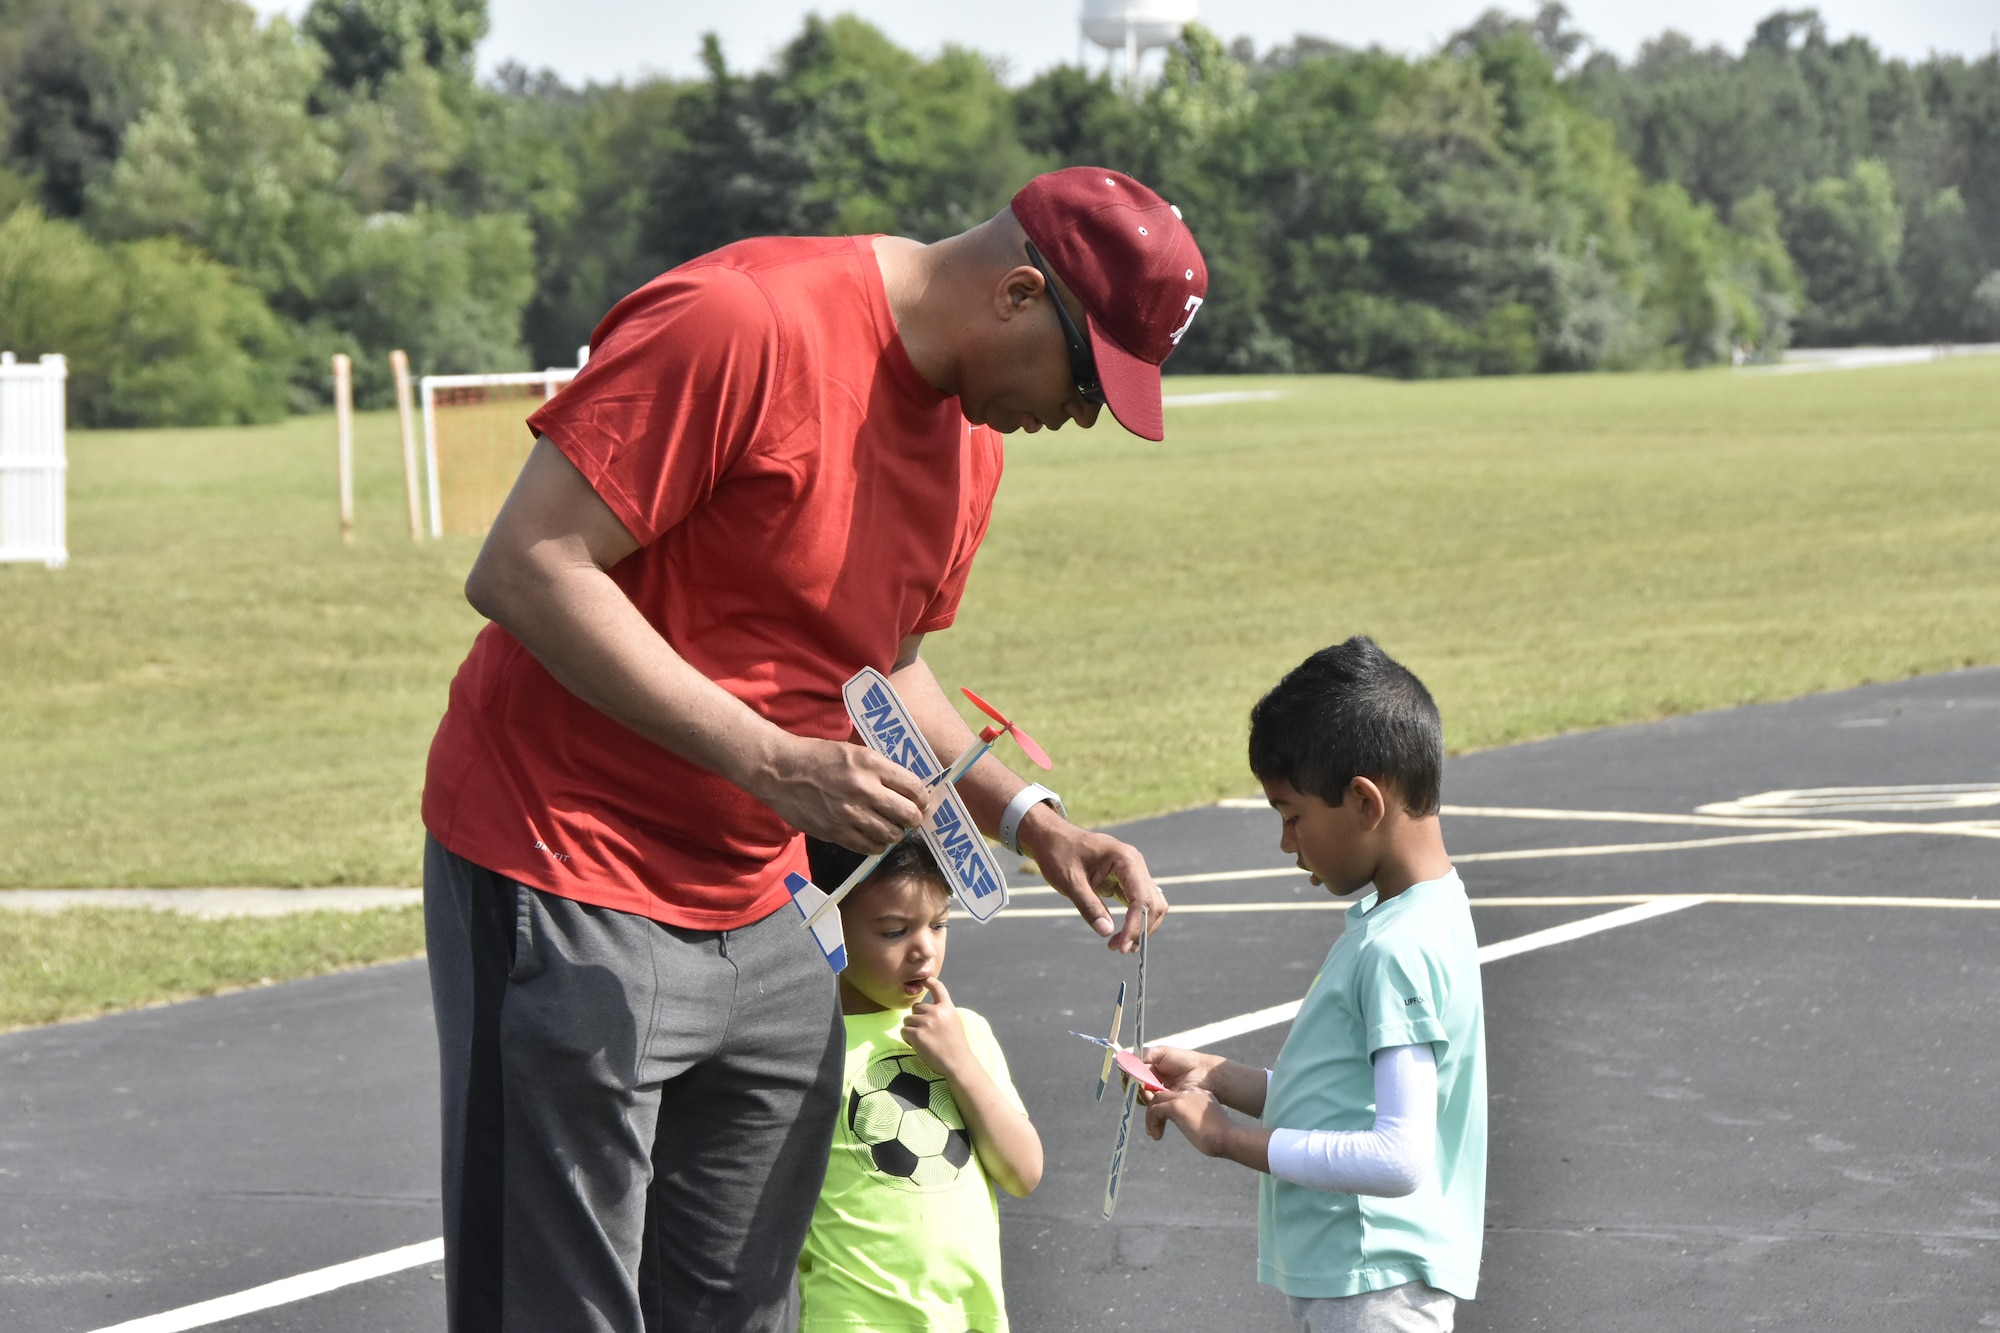 Col. Lincoln Bonner, chief of the Arnold Engineering Development Complex Test Division, helps his son Solomon, right, ready his balsa wood airplane for a practice toss during a June 26, 2021, event hosted by the Coffee Airfoilers Model RC Club to coincide with the AEDC 70th anniversary celebration. Also pictured is Bonner’s son Romal. Youth participating in the event were tasked with assembling small balsa wood airplanes, with top prizes going to those whose planes flew the farthest from the launch line. The event was intended to promote science, technology, engineering and mathematics, or STEM, interest among students taking part. (U.S. Air Force photo by Bradley Hicks)